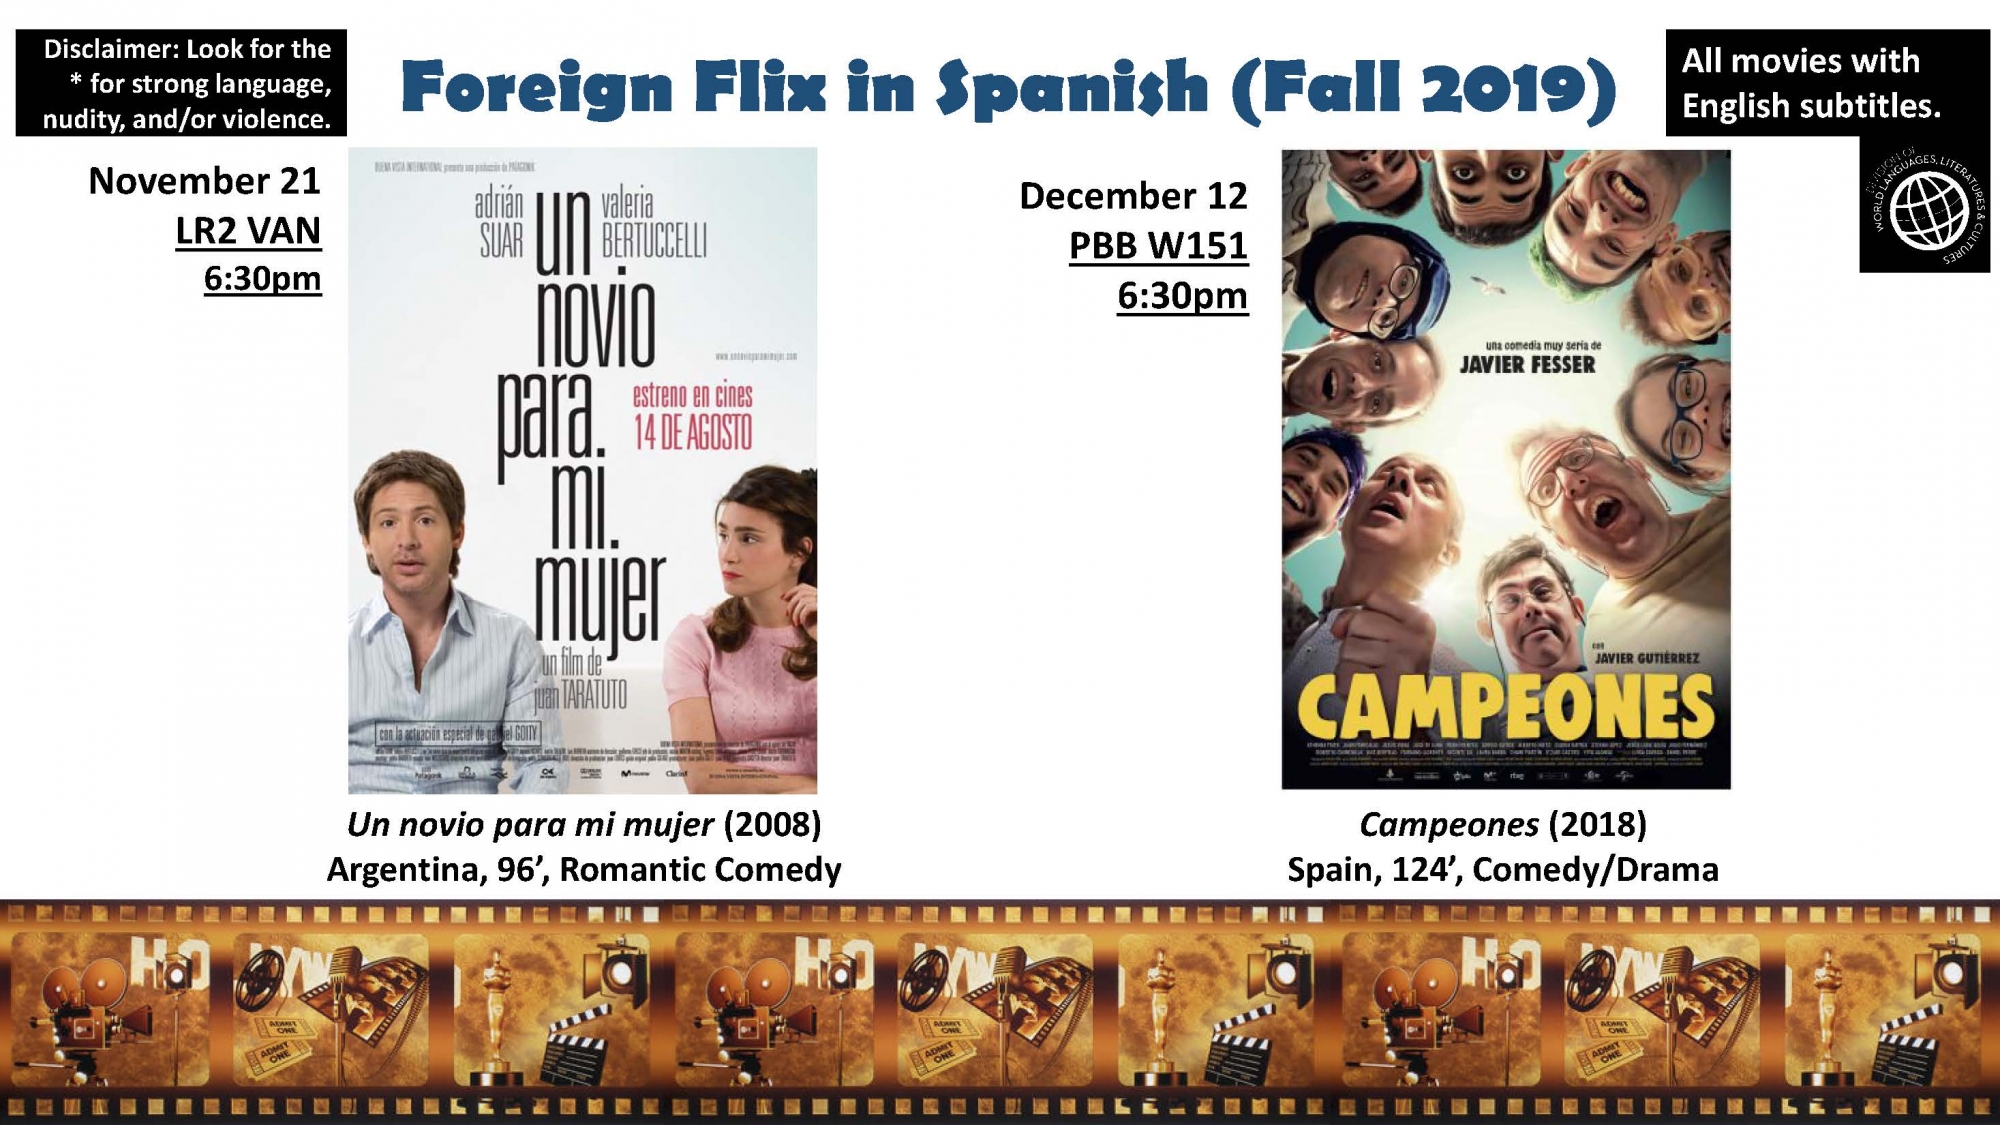 Foreign Flix in Spanish (Fall 2019)  Disclaimer: Look for the * for strong language, nudity, and/or violence.  All movies with English subtitles.  November 21 LR2 VAN 6:30pm  Un novio para mi mujer (2015) Argentina, 96’, Romantic Comedy  December 12 PBB W151 6:30pm  Campeones (2018) Spain, 124’, Comedy/Drama